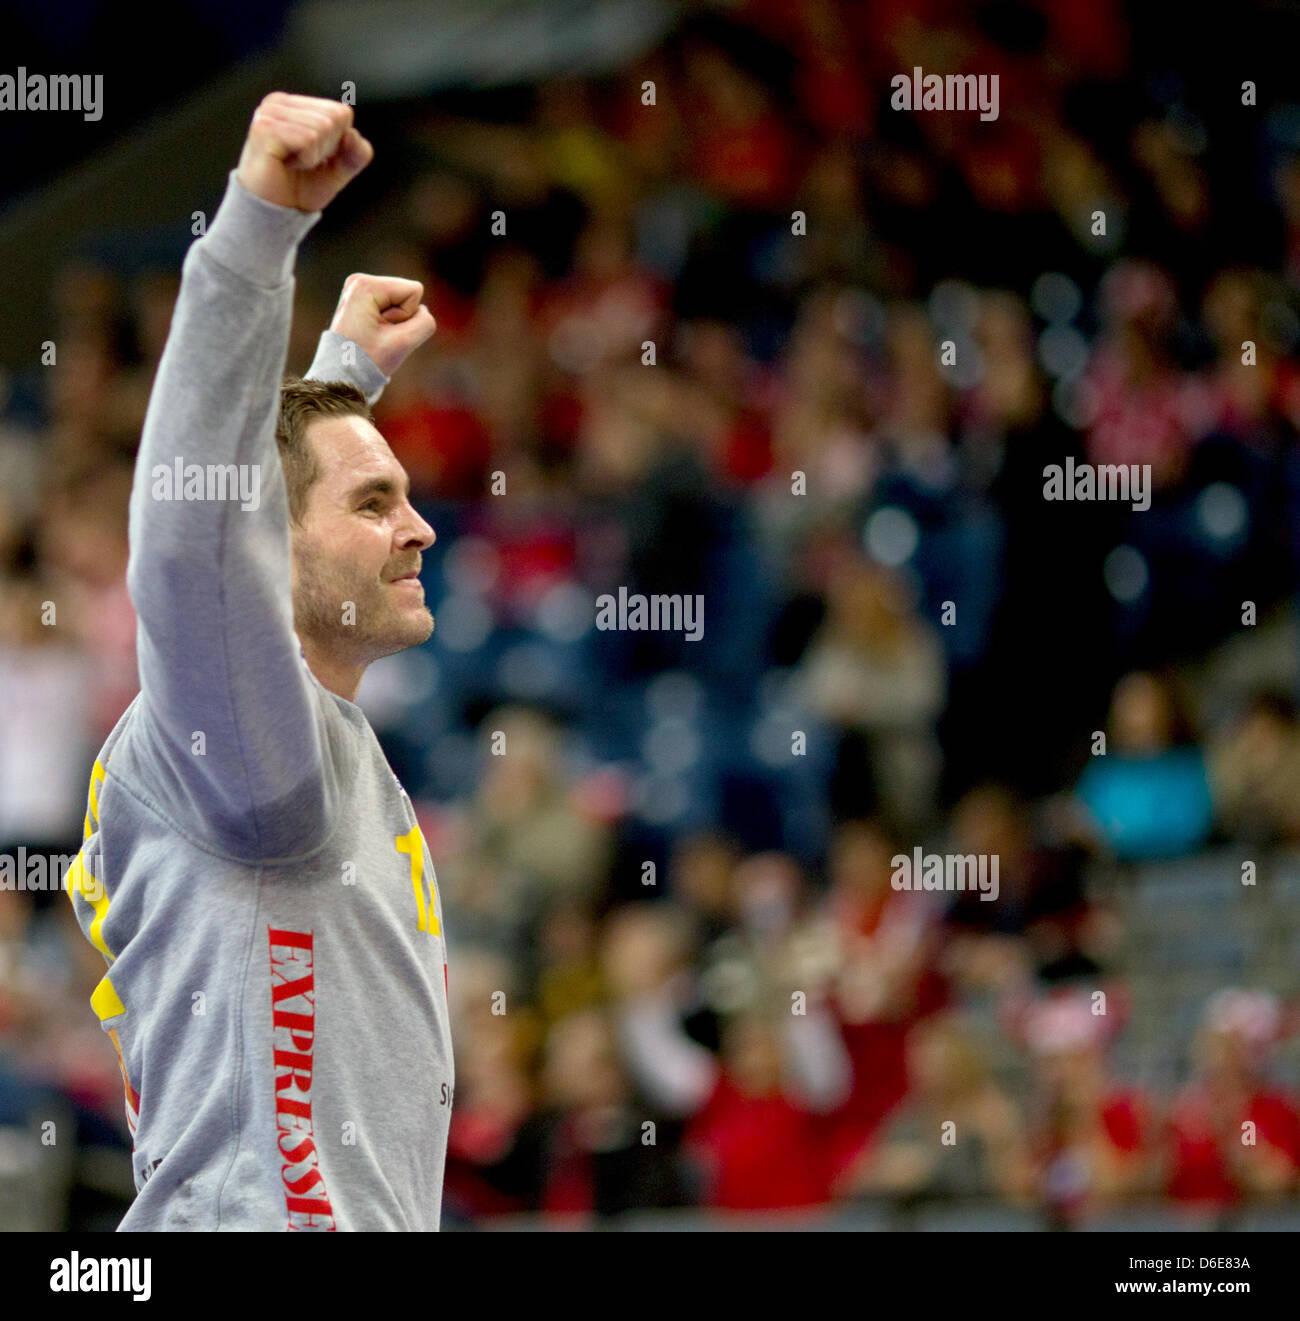 Sweden's goalkeeper Andreas Palicka cheers during the handball European championship match between Poland and Schweden in Belgrade, Serbia, 21 January 2012. The match was tied 29-29. Photo: Jens Wolf Stock Photo